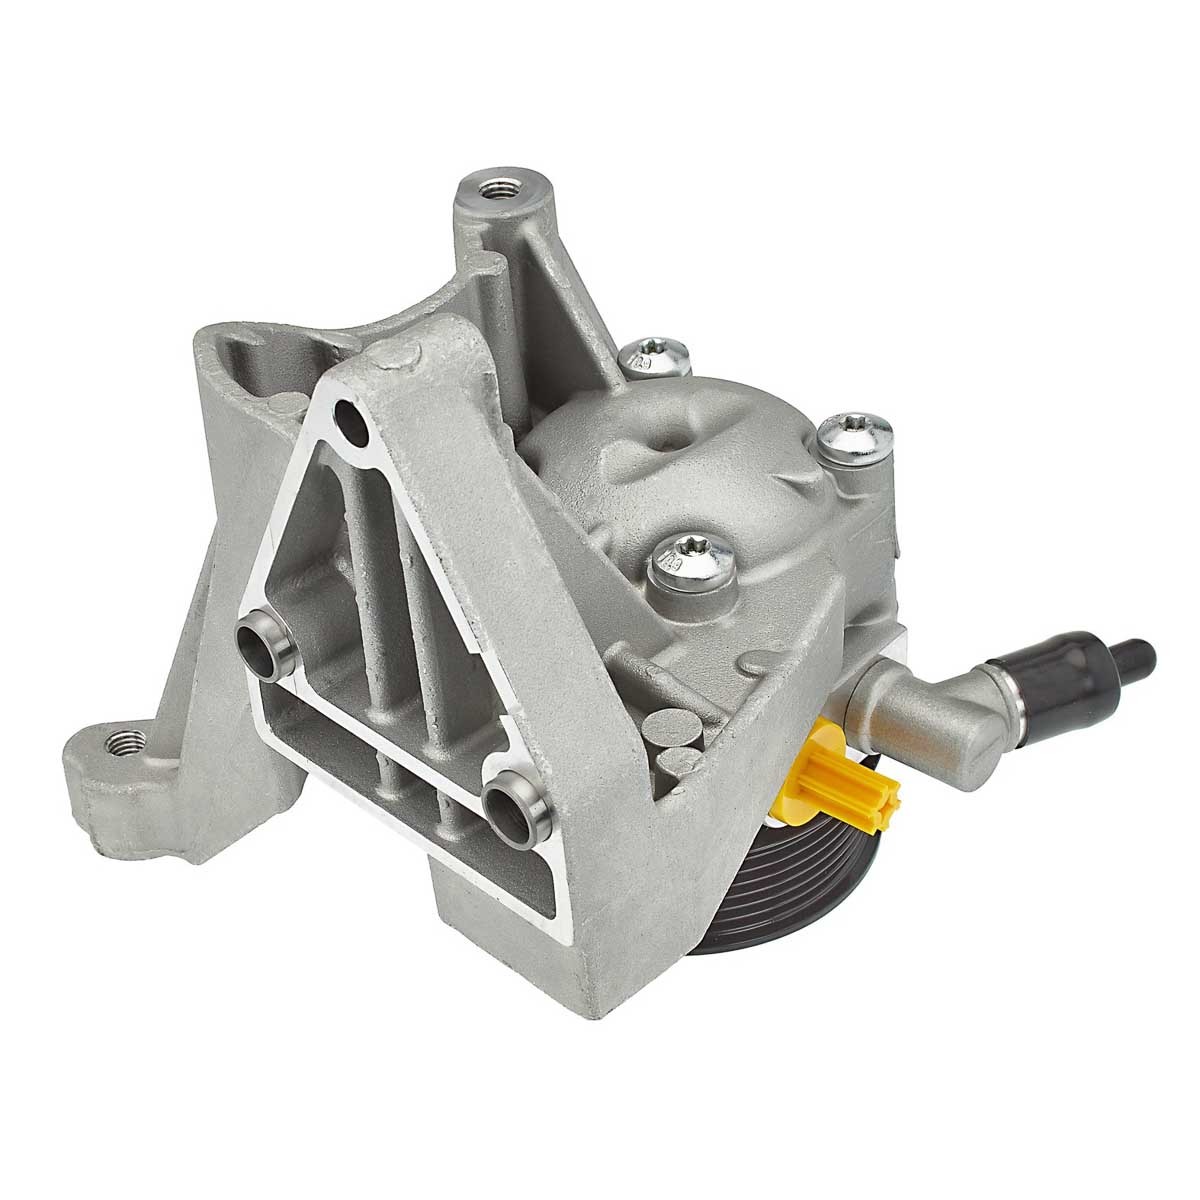 MEYLE Hydraulic steering pump 214 631 0000 for FIAT DUCATO